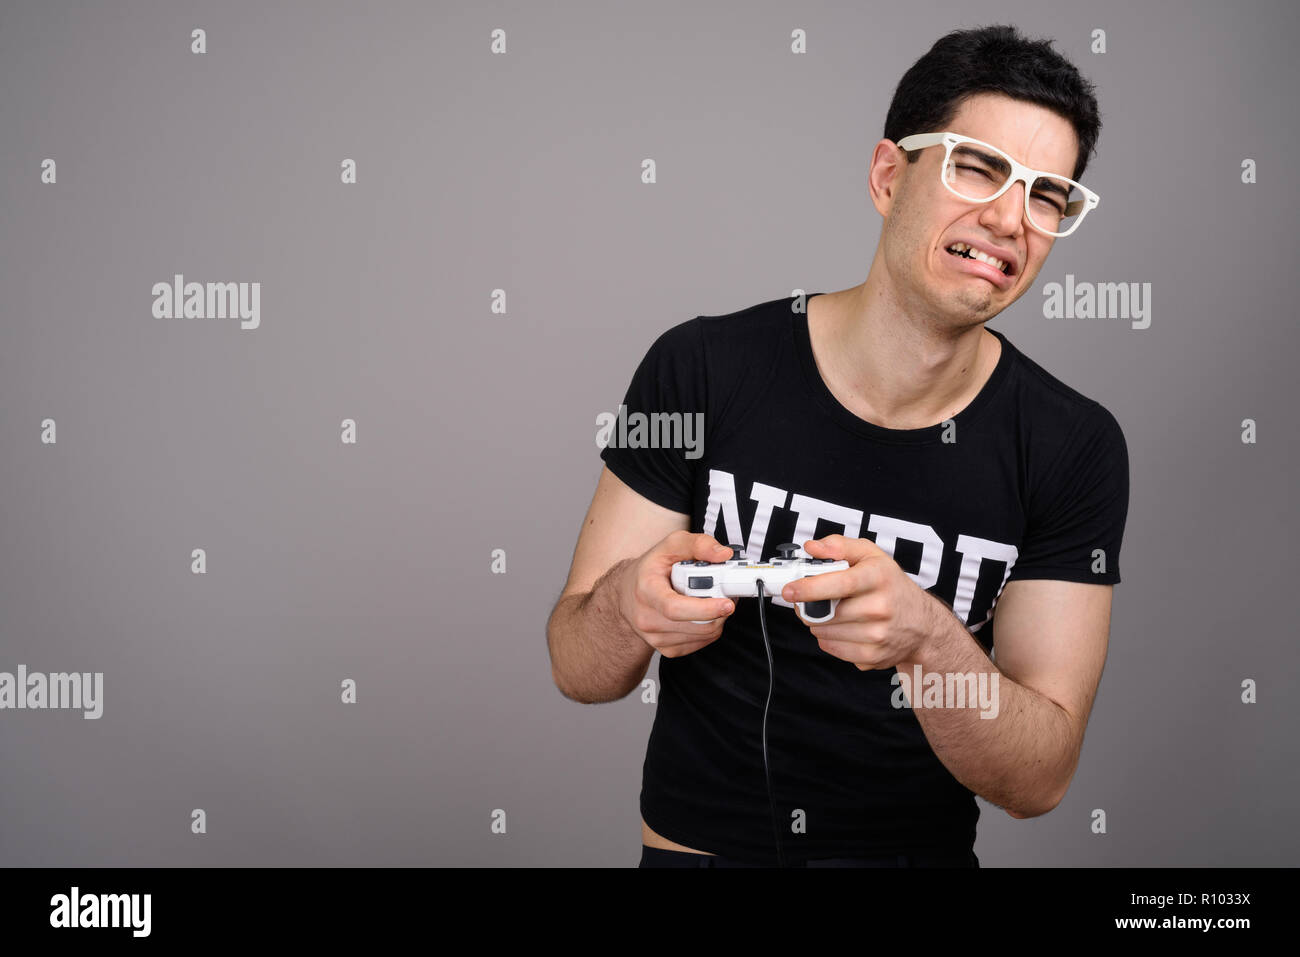 Young handsome nerd man with eyeglasses against gray background Stock Photo